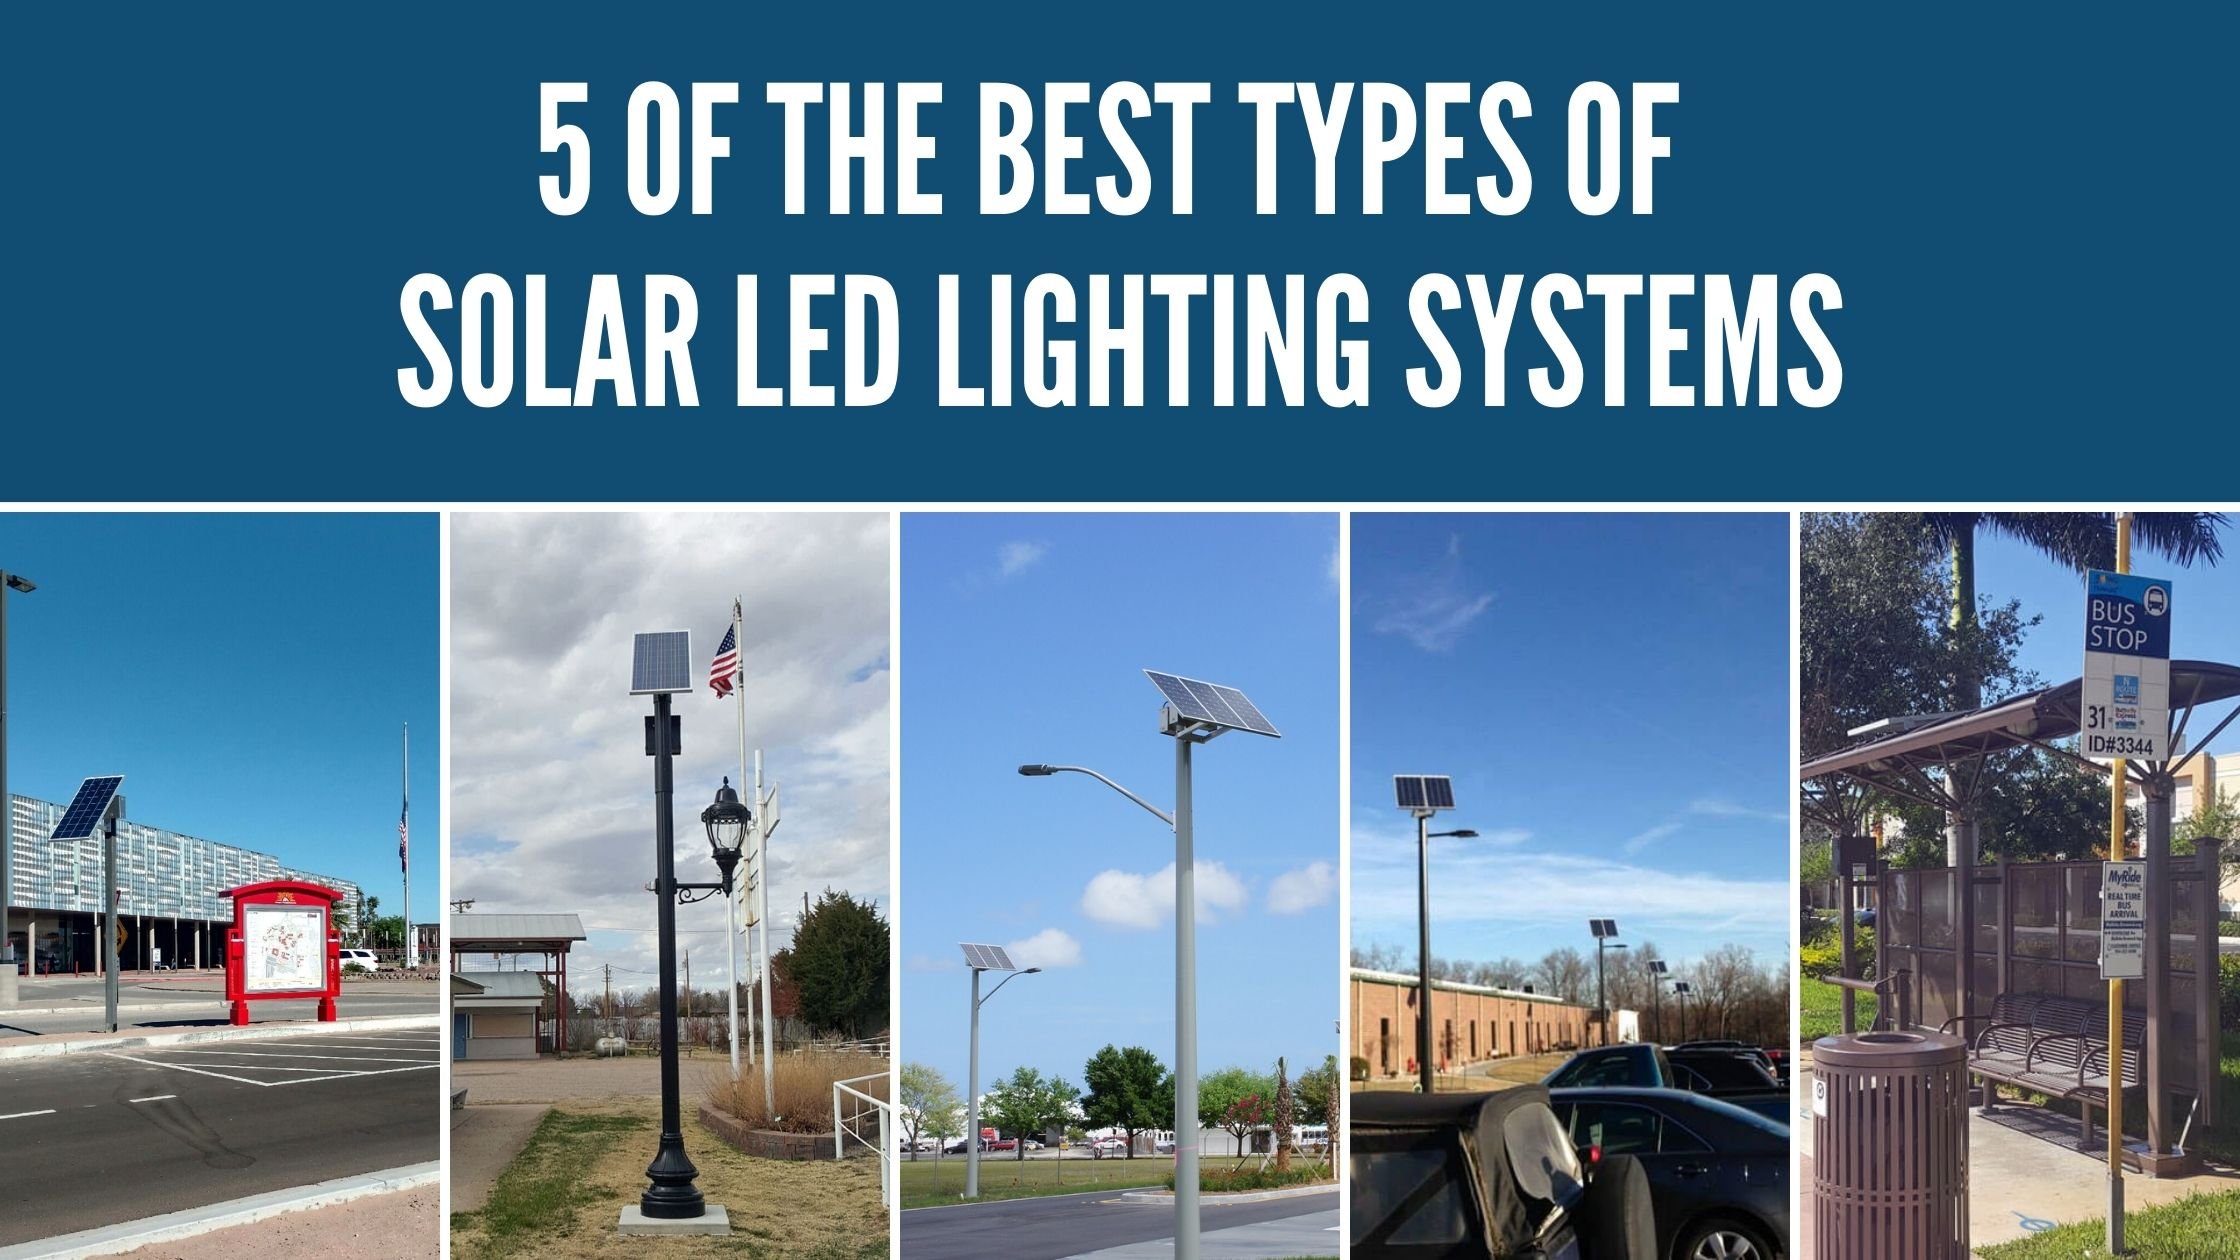 5 of the Best Types of Solar LED Lighting Systems